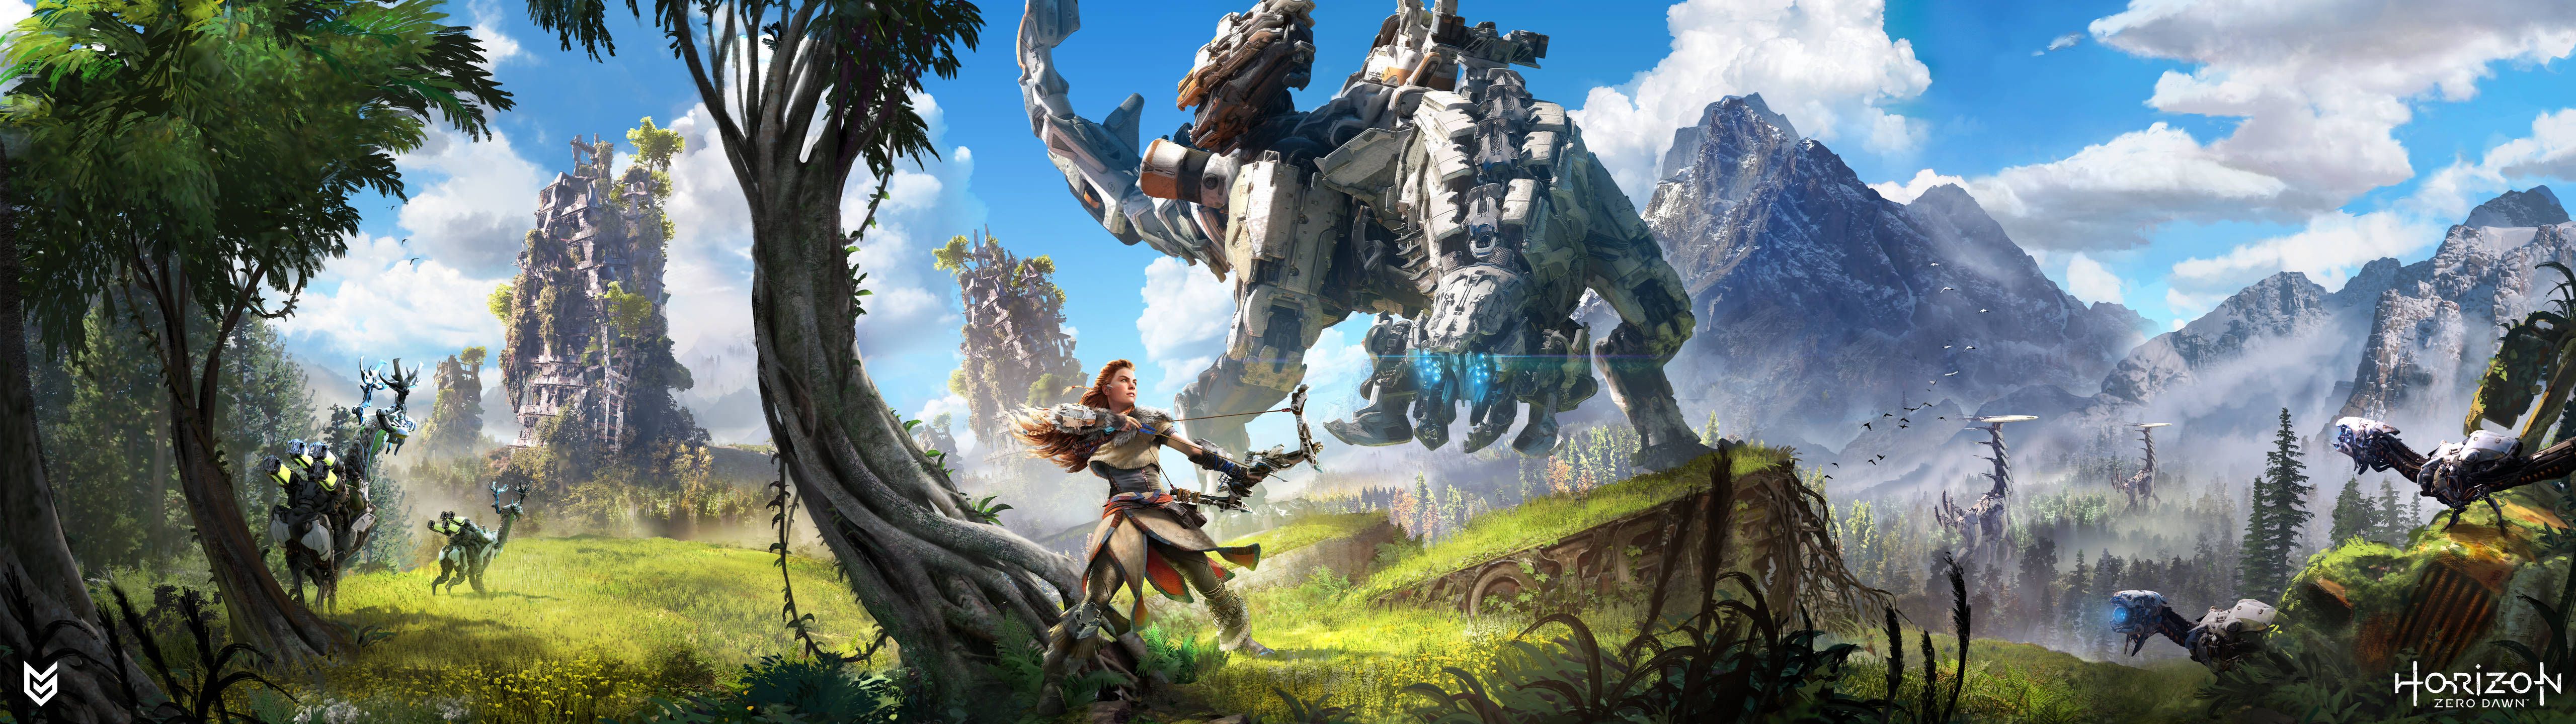 Aloy, the main protagonist of Horizon Zero Dawn, faces off against a massive robotic dinosaur in the game's open-world environment. - 5120x1440